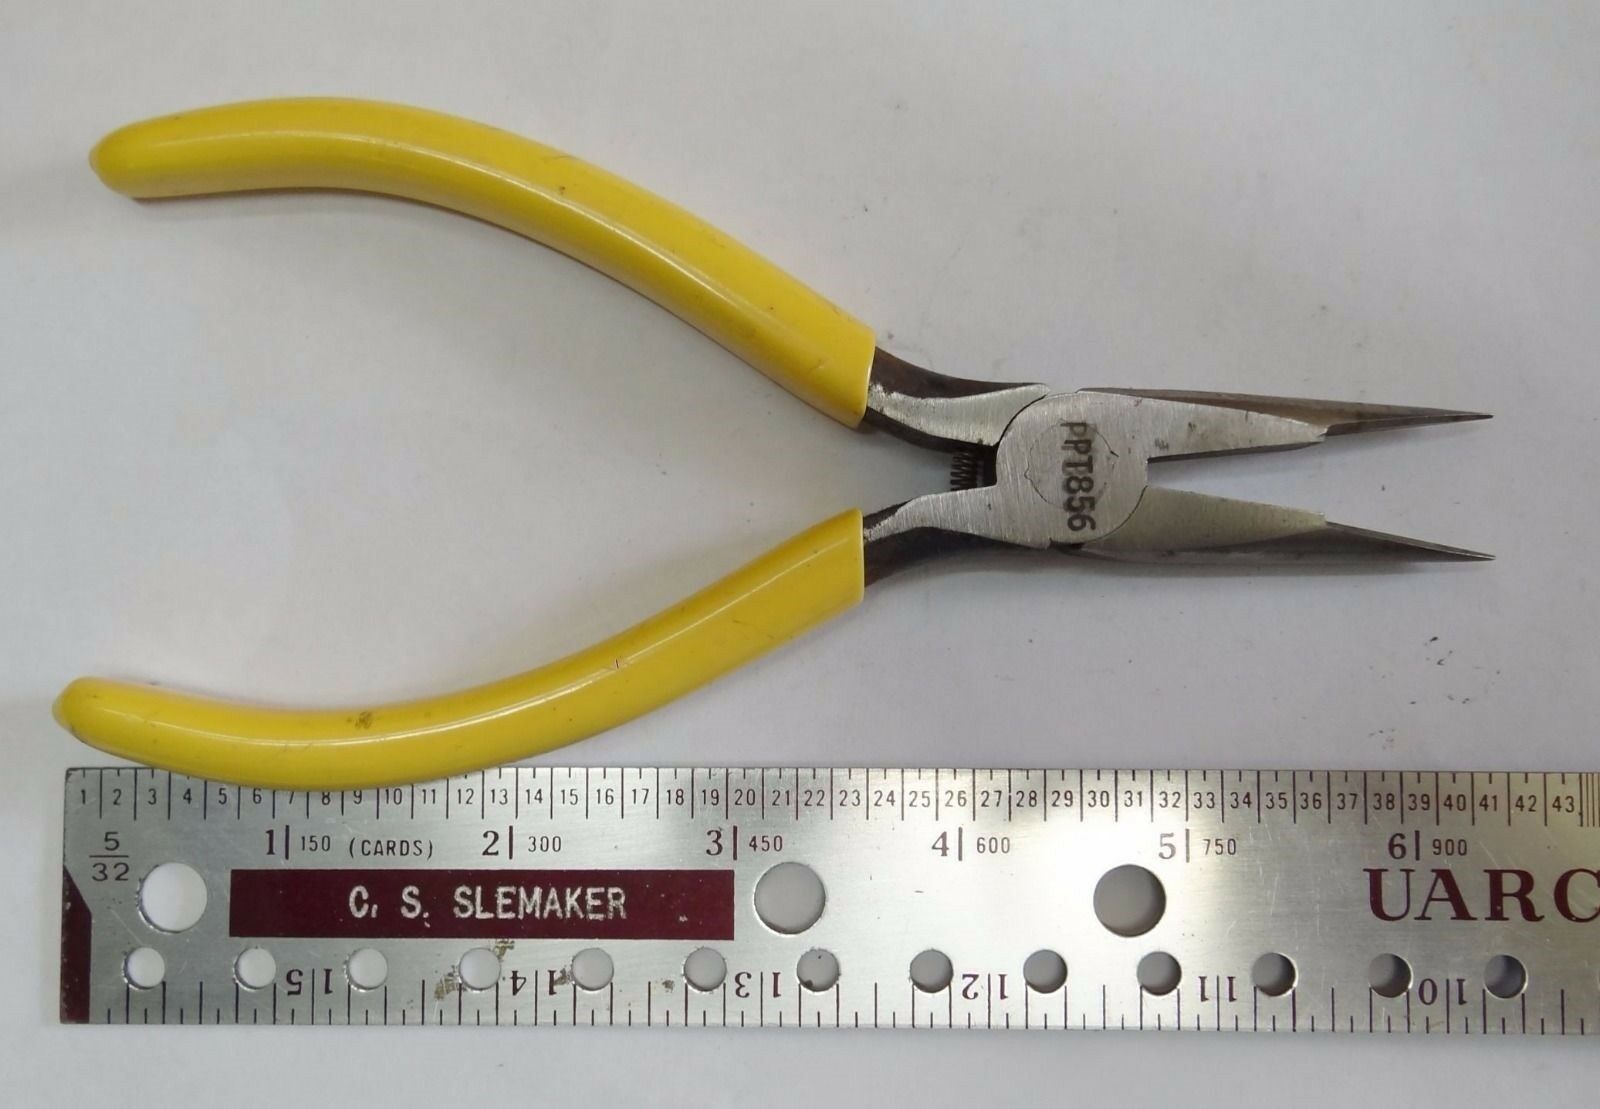 KLEIN & SONS SPECIALTY NEEDLE NOSE PLIERS PT856 - $18.99